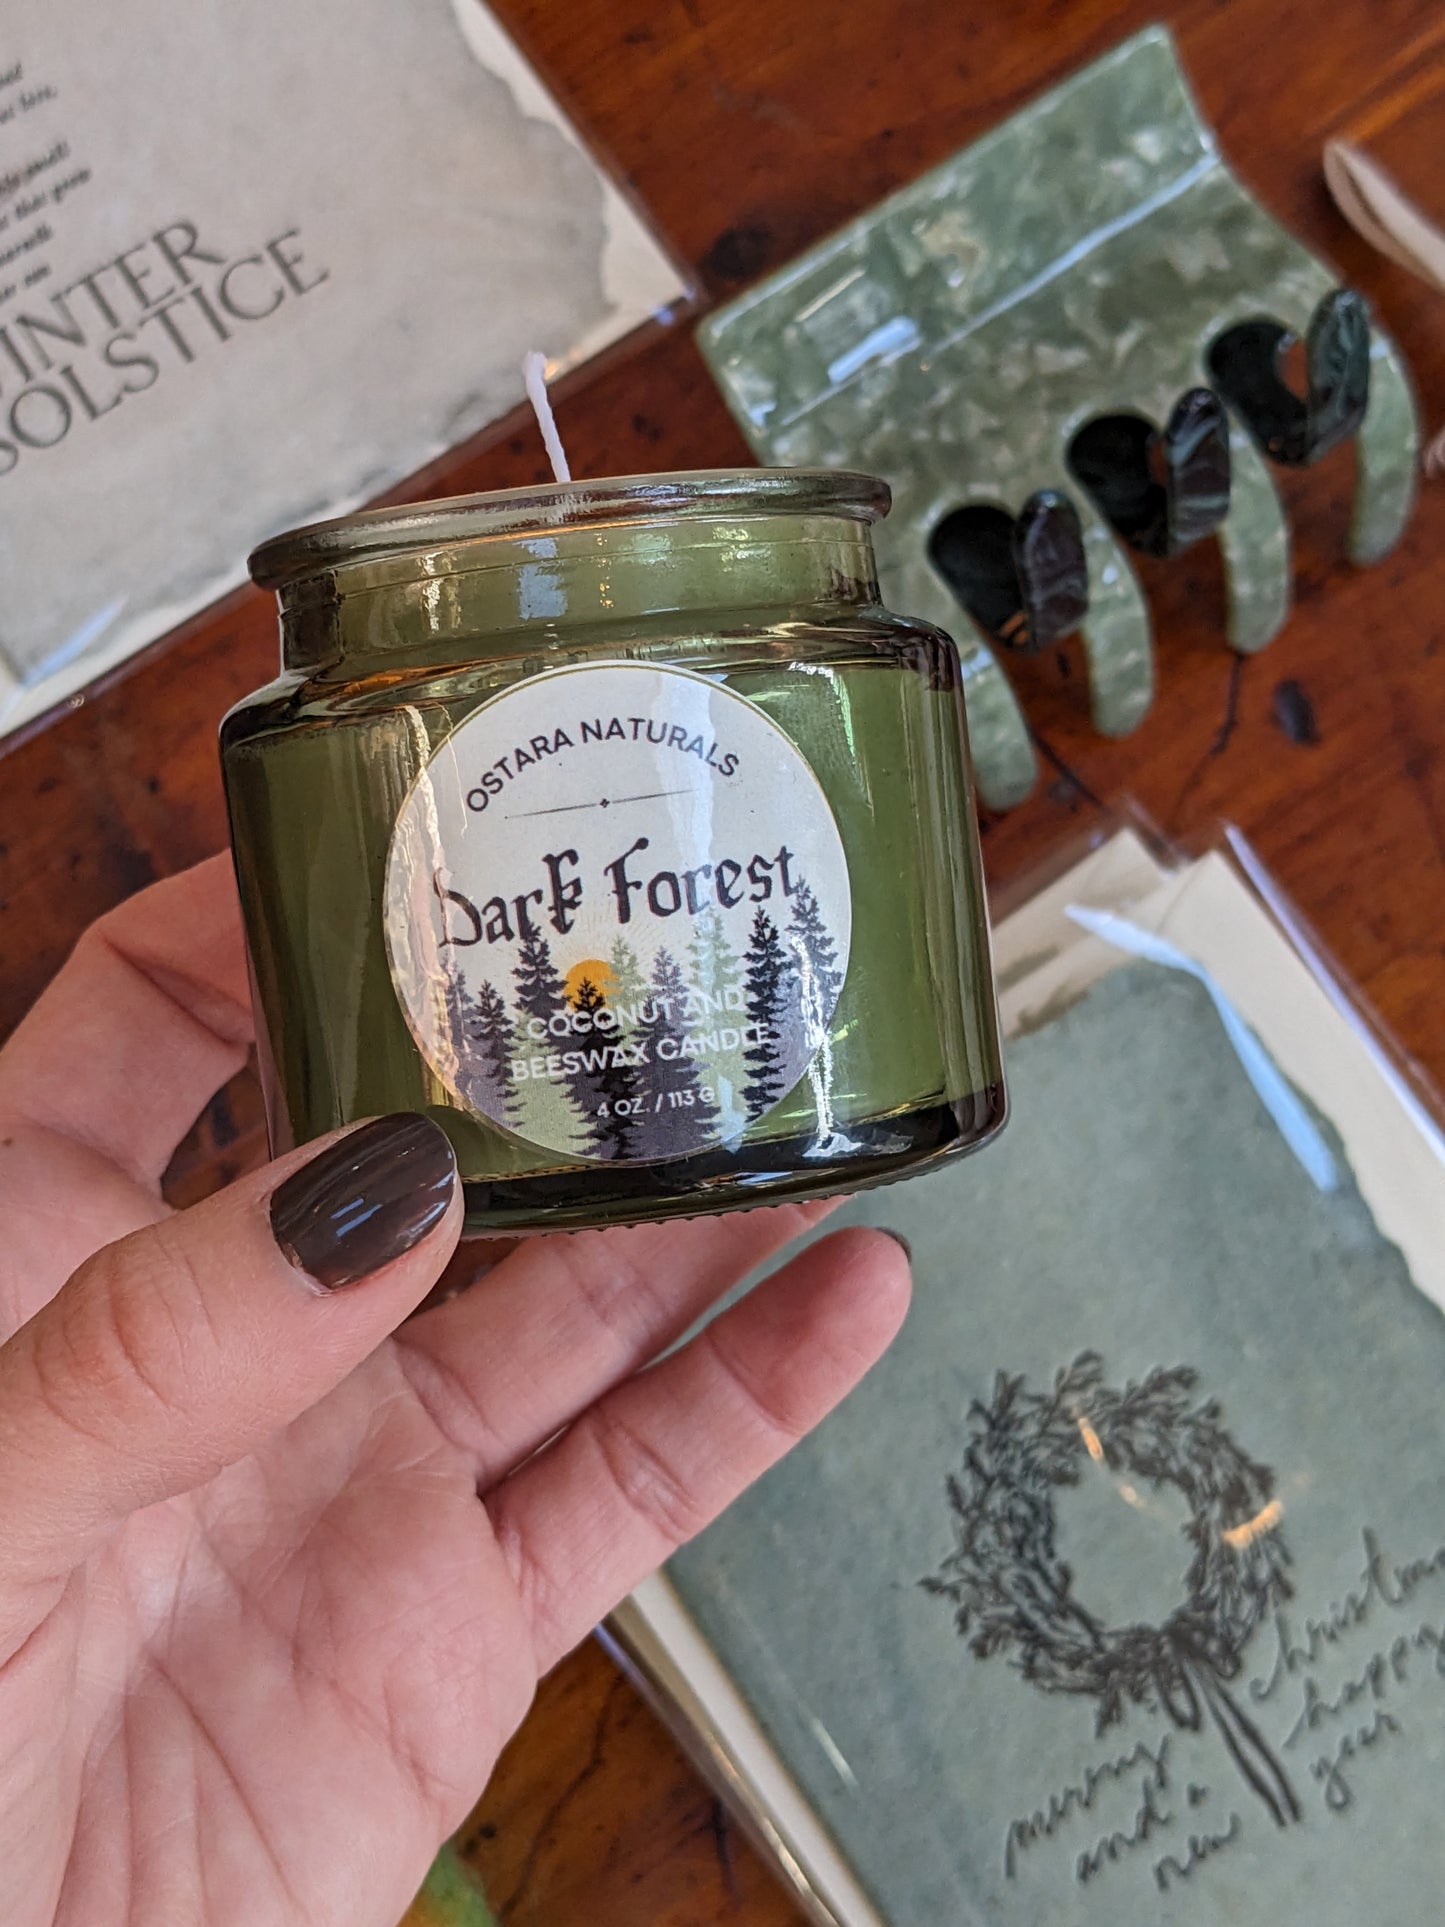 Dark Forest - Coconut & Beeswax Candle